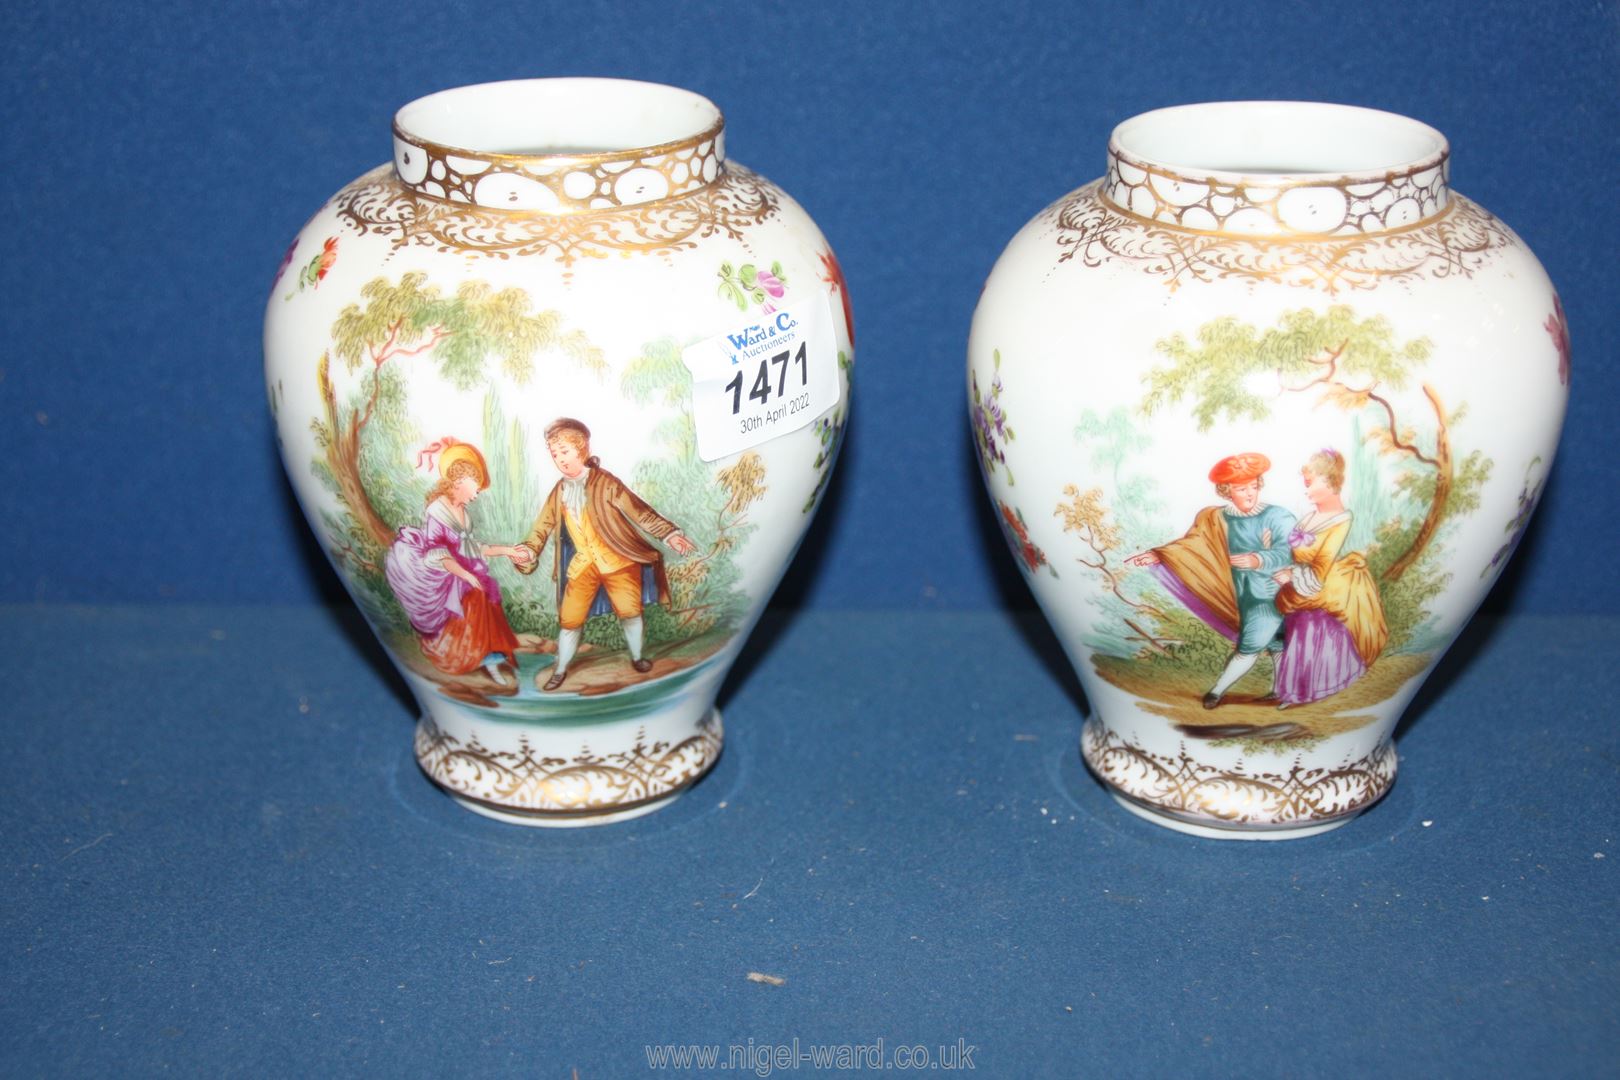 Two similar looking Dresden china vases gilded and hand painted with Victorian scenes 5 1/2" tall.